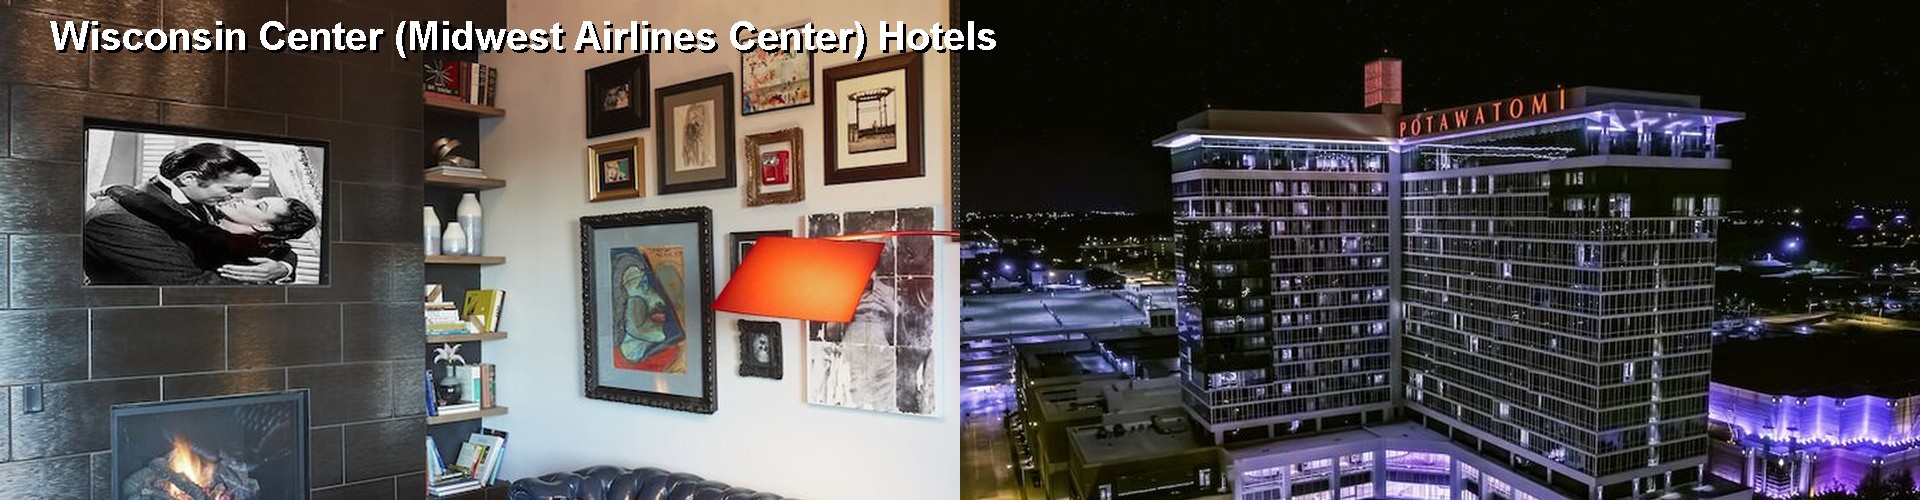 5 Best Hotels near Wisconsin Center (Midwest Airlines Center)